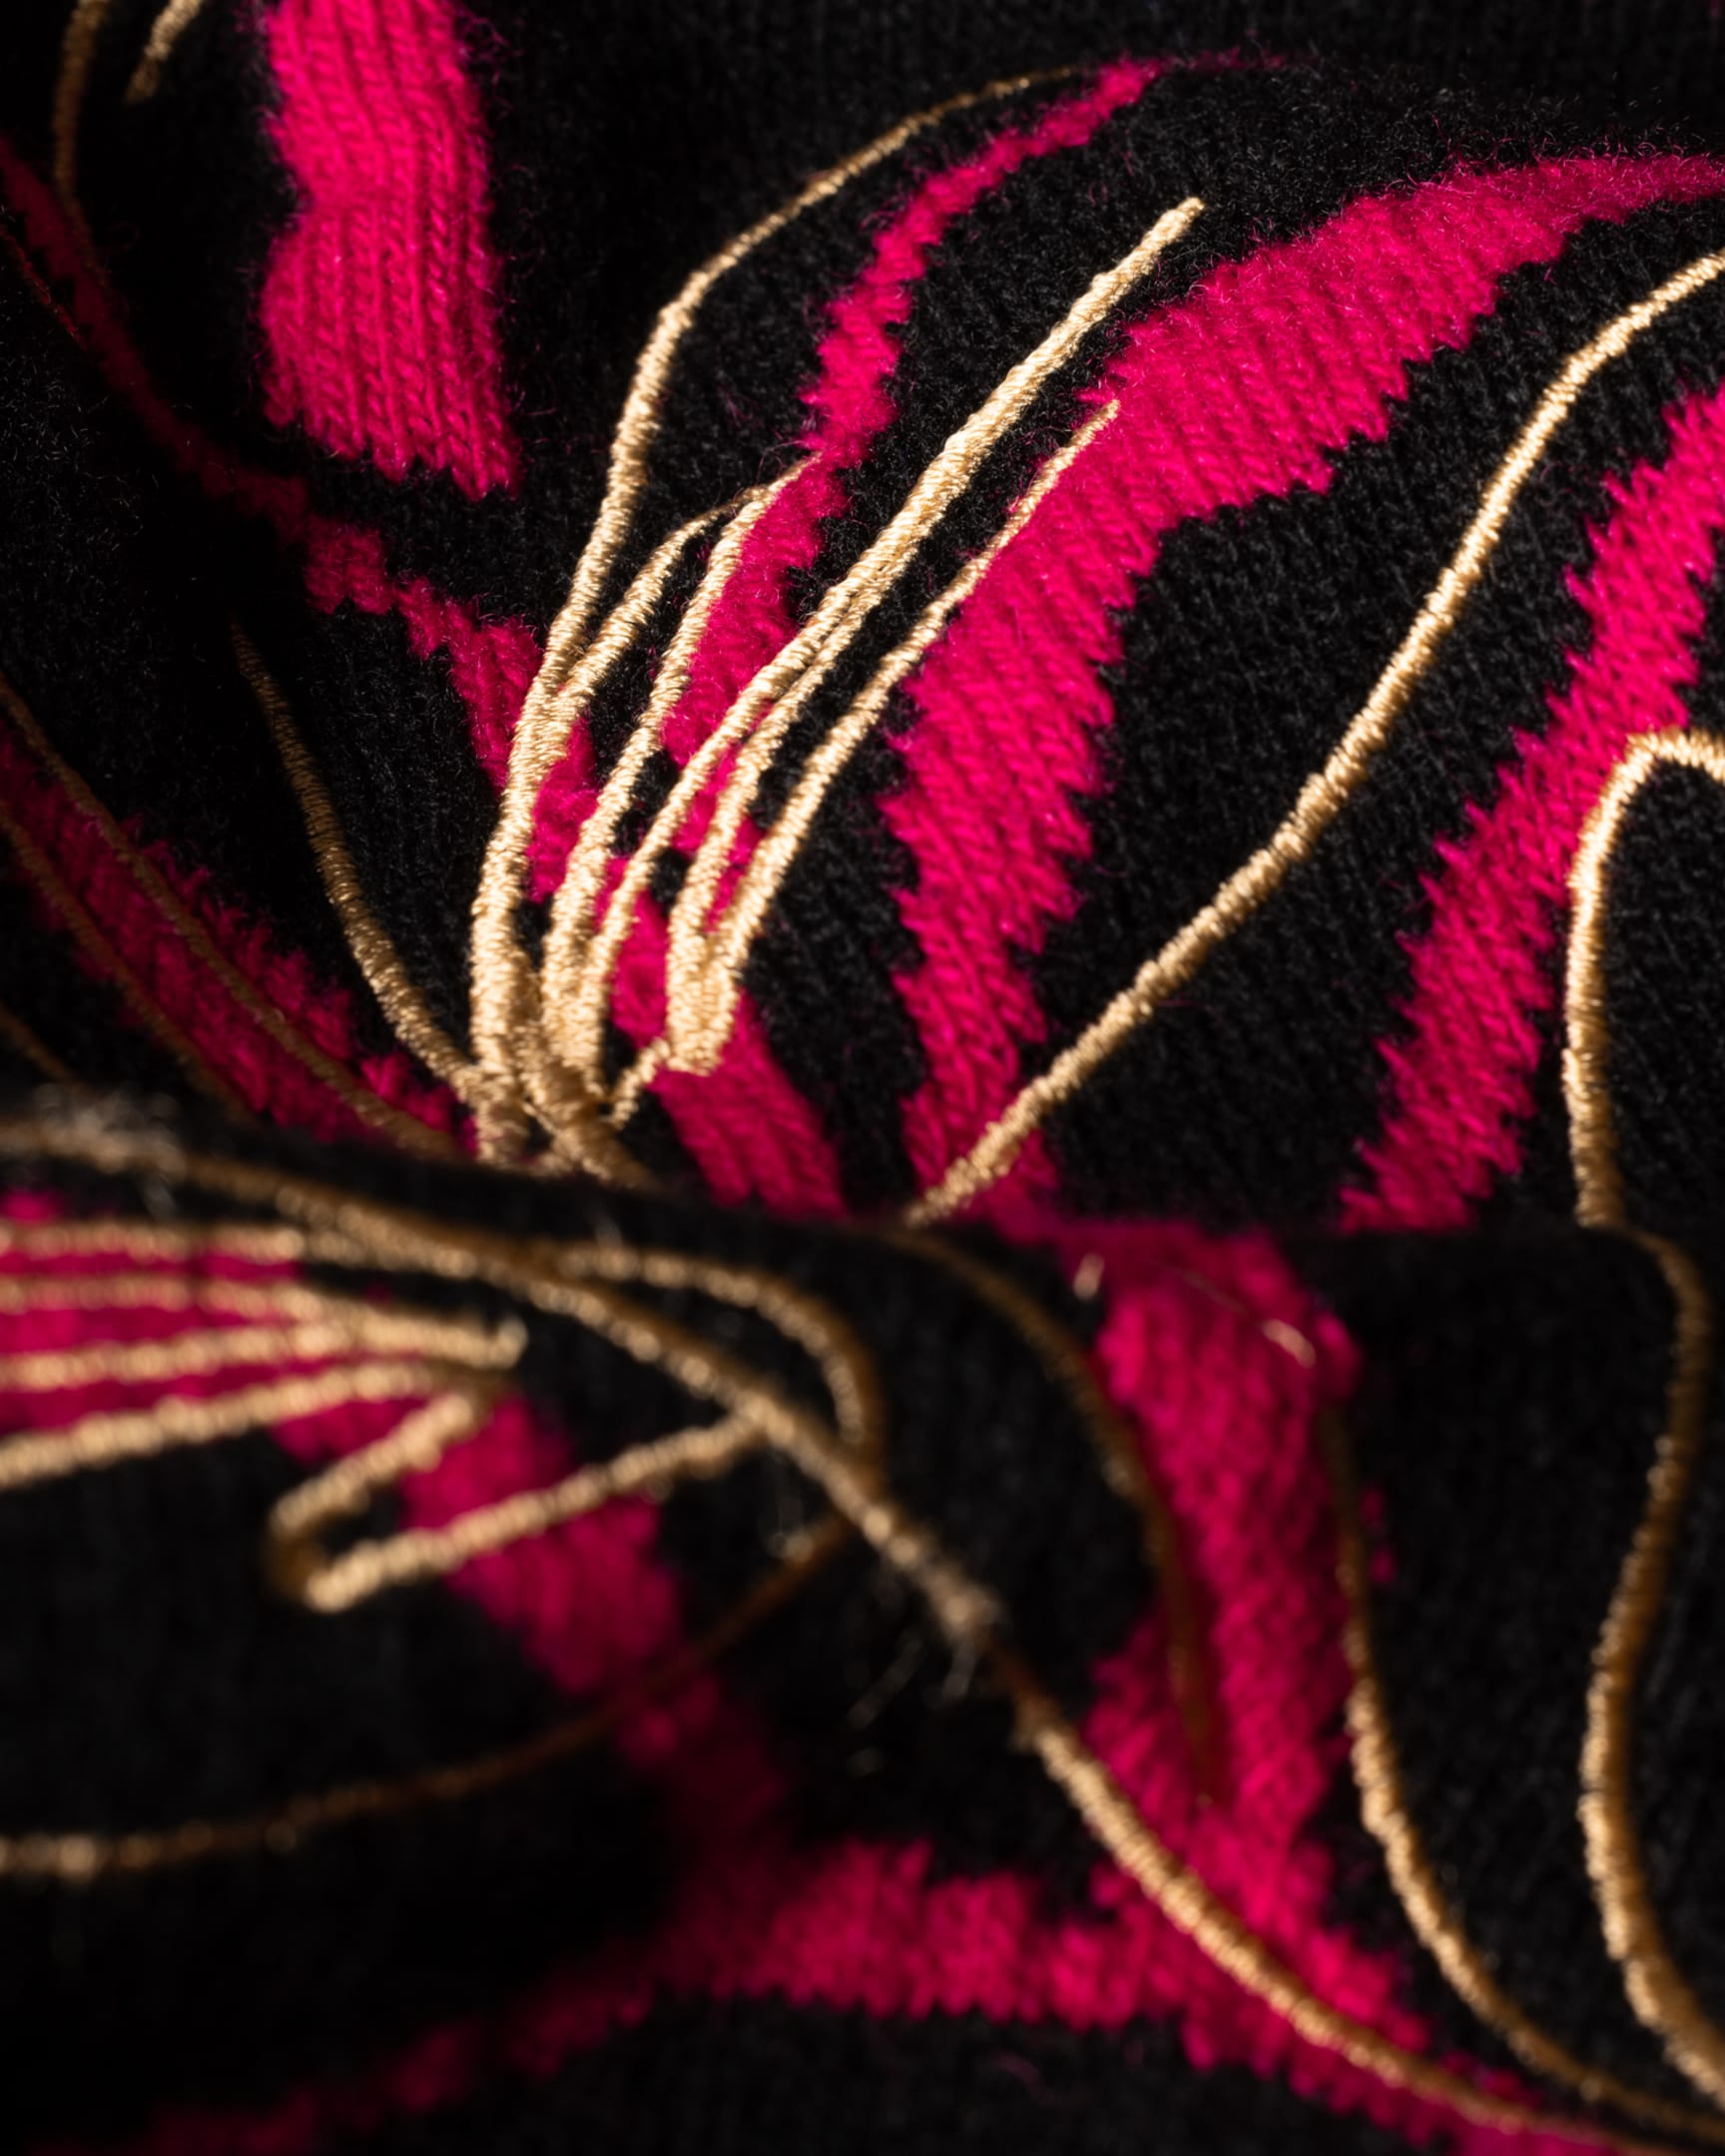 Detail View - Women's Black 'Ink Floral' Lambswool Sweater Paul Smith